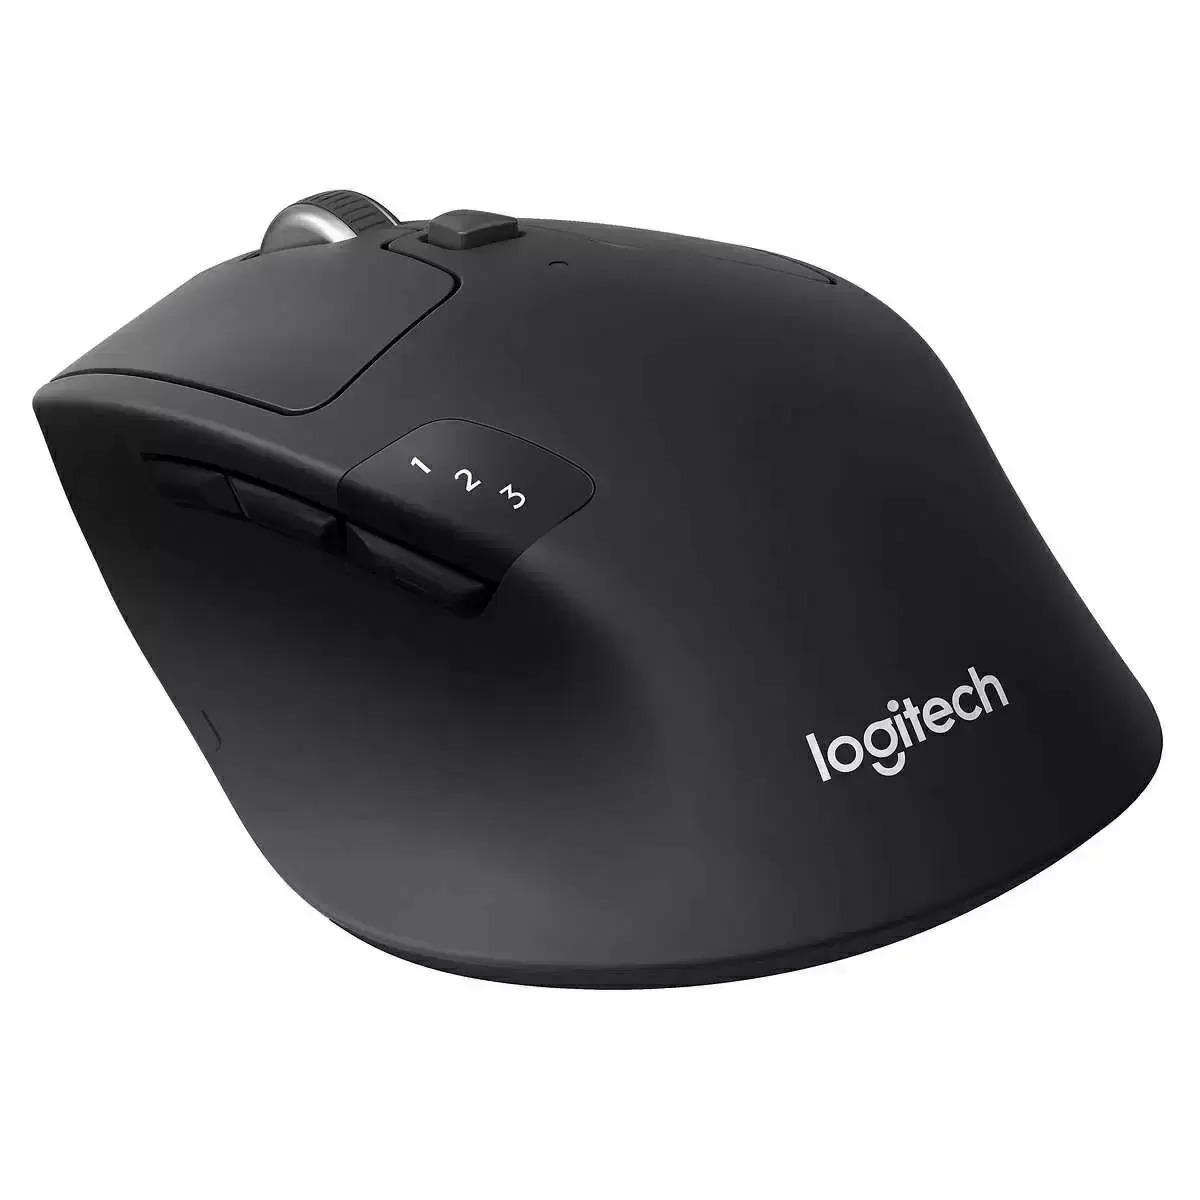 Logitech Precision Pro Wireless Mouse with Unifying Receiver for $24.98 Shipped